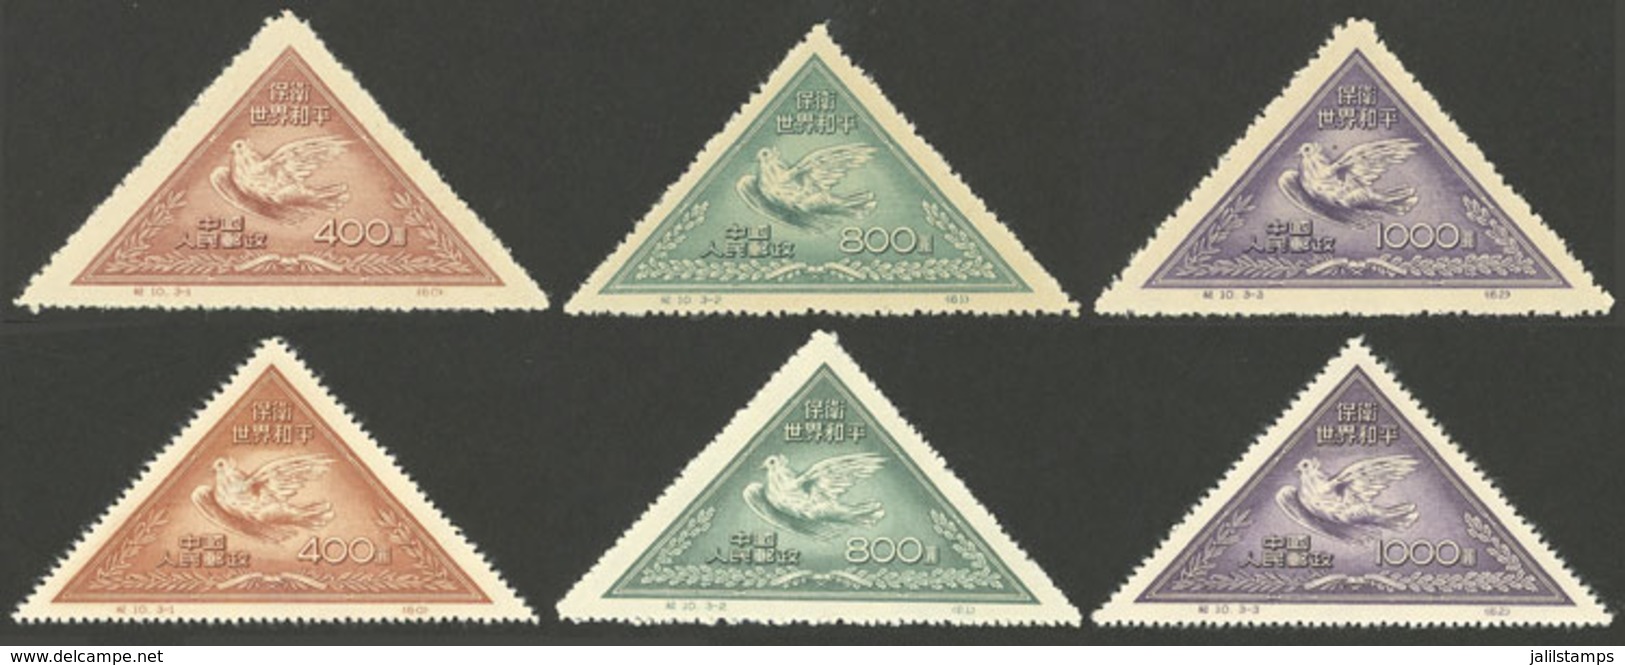 CHINA: Sc.108/110, 1951 Dove, World Peace, Cmpl. Set Of 3 Values, Mint Very Lightly Hinged (issued Without Gum), ORIGINA - Gebraucht